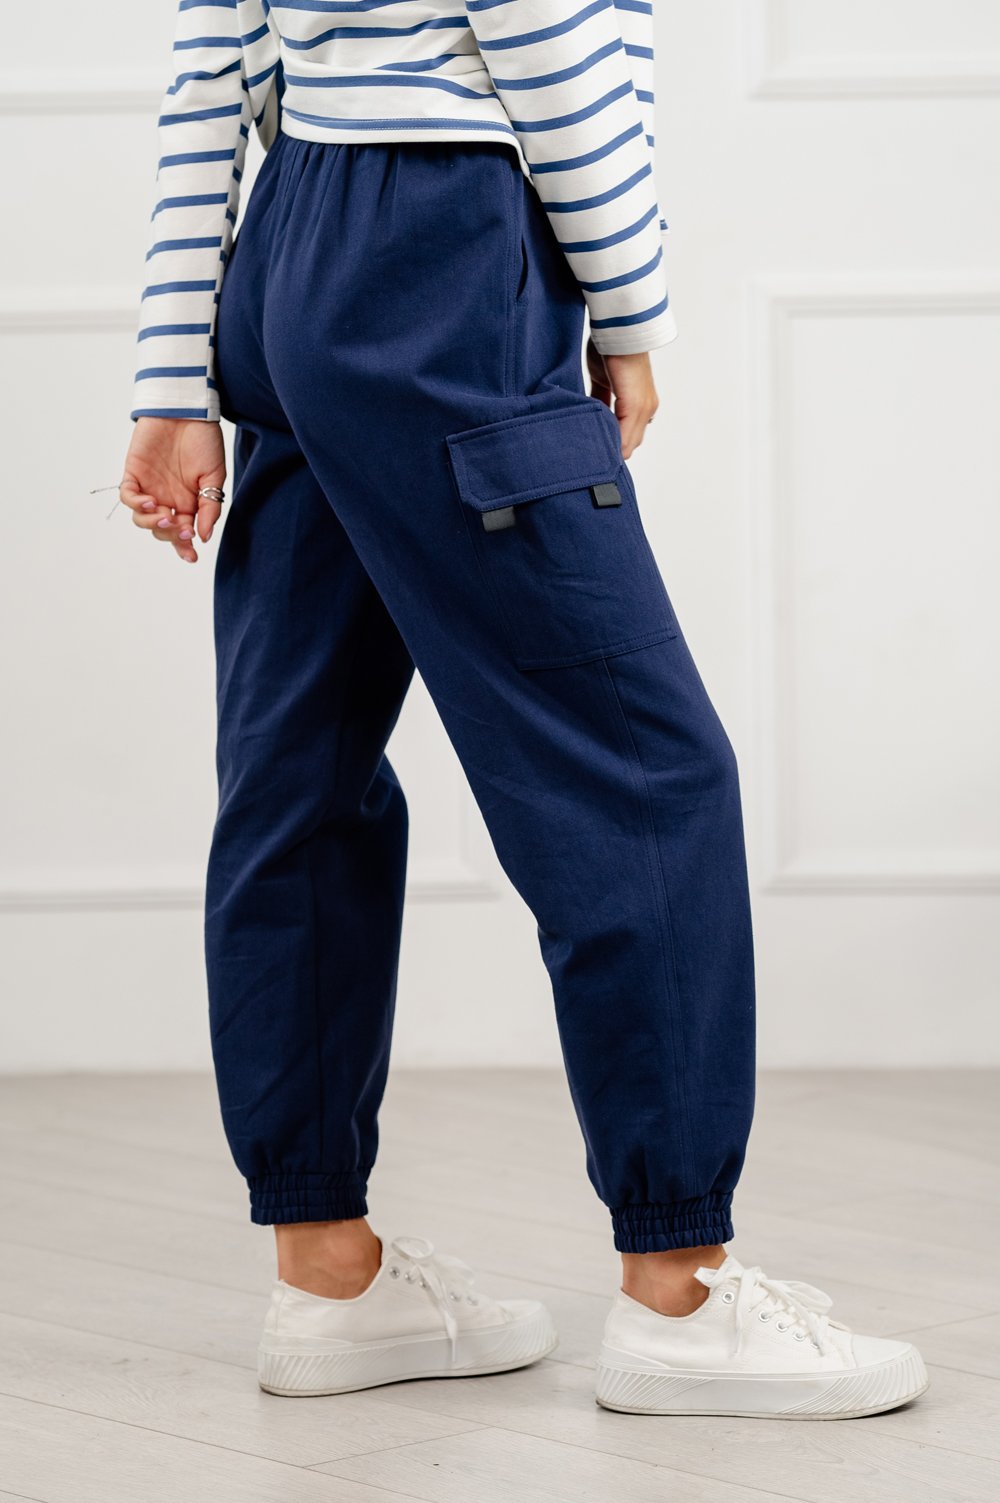 Blue cargo pants in casual style.